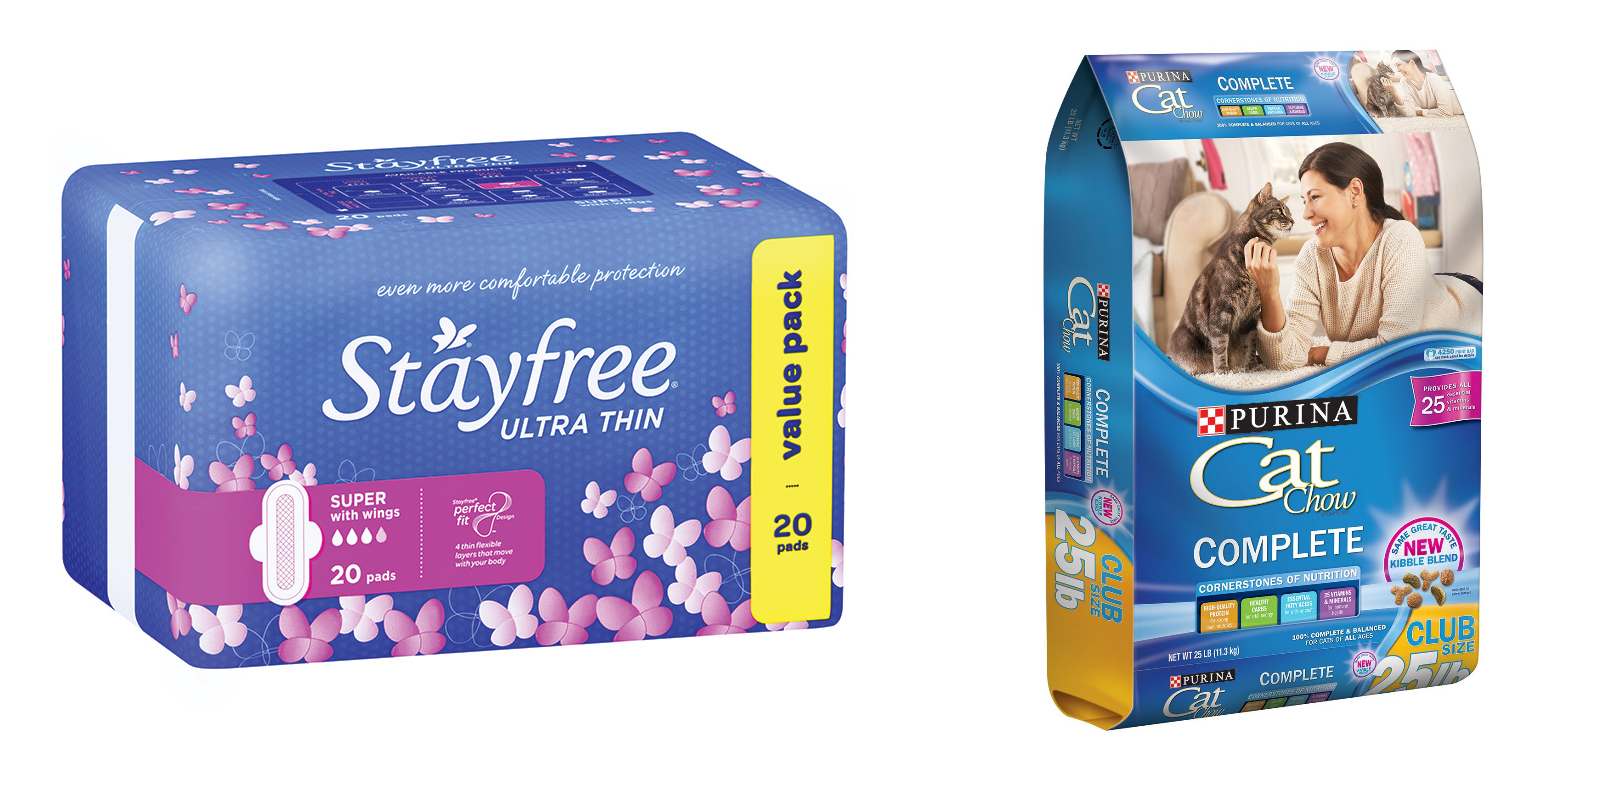 Coupons: Stayfree and Purina Cat Chow